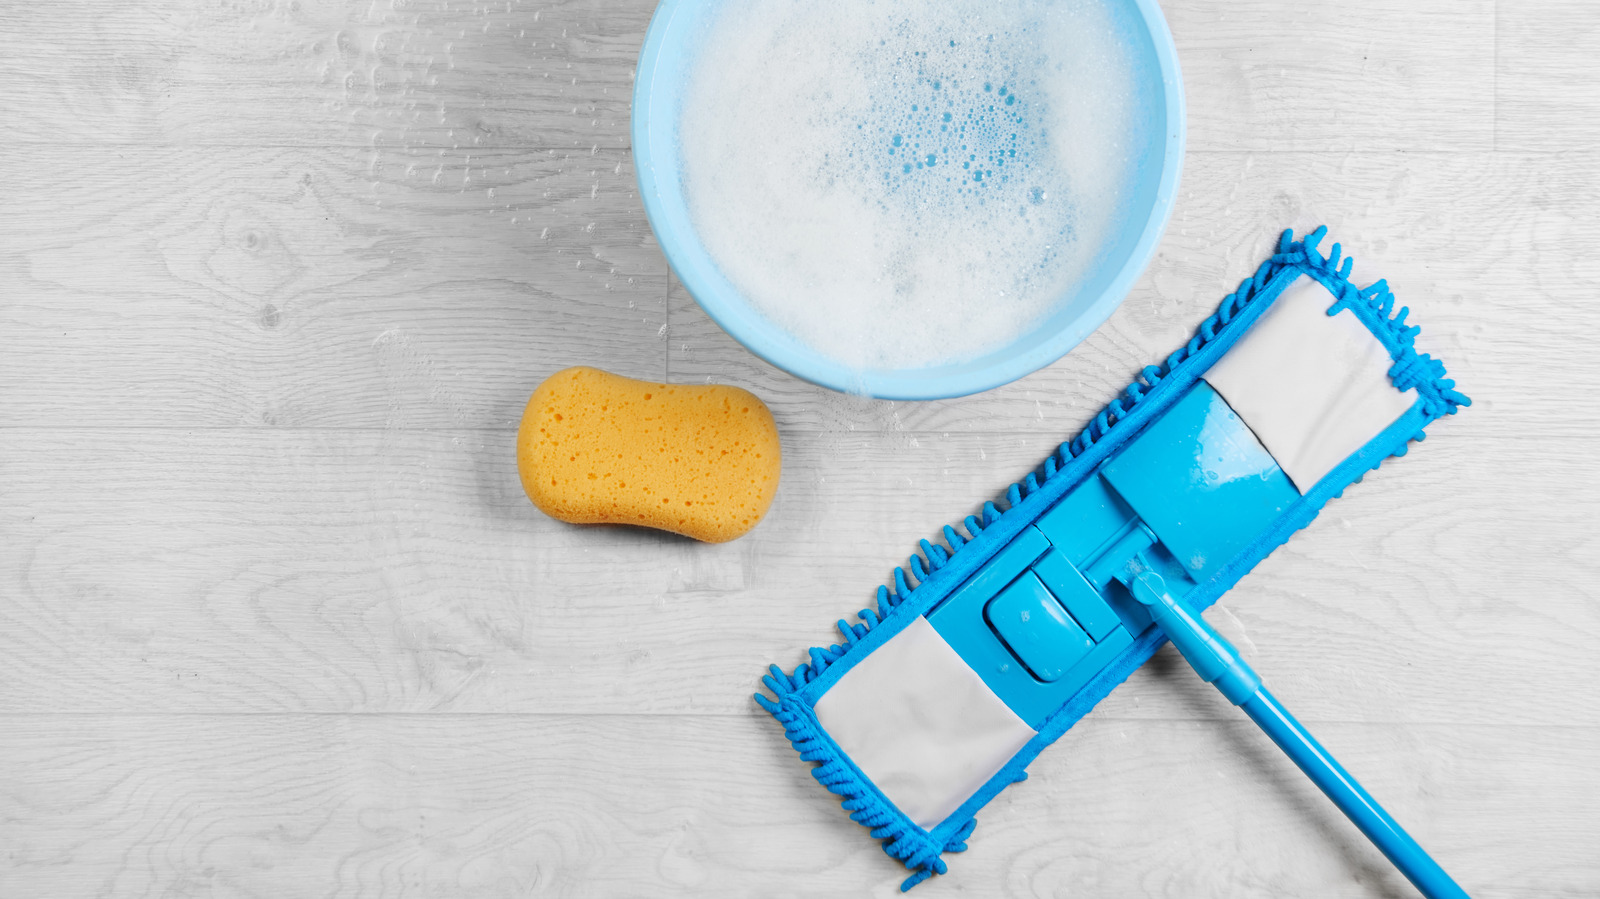 What's the Difference Between Wet, Dust, and Microfiber Mops?